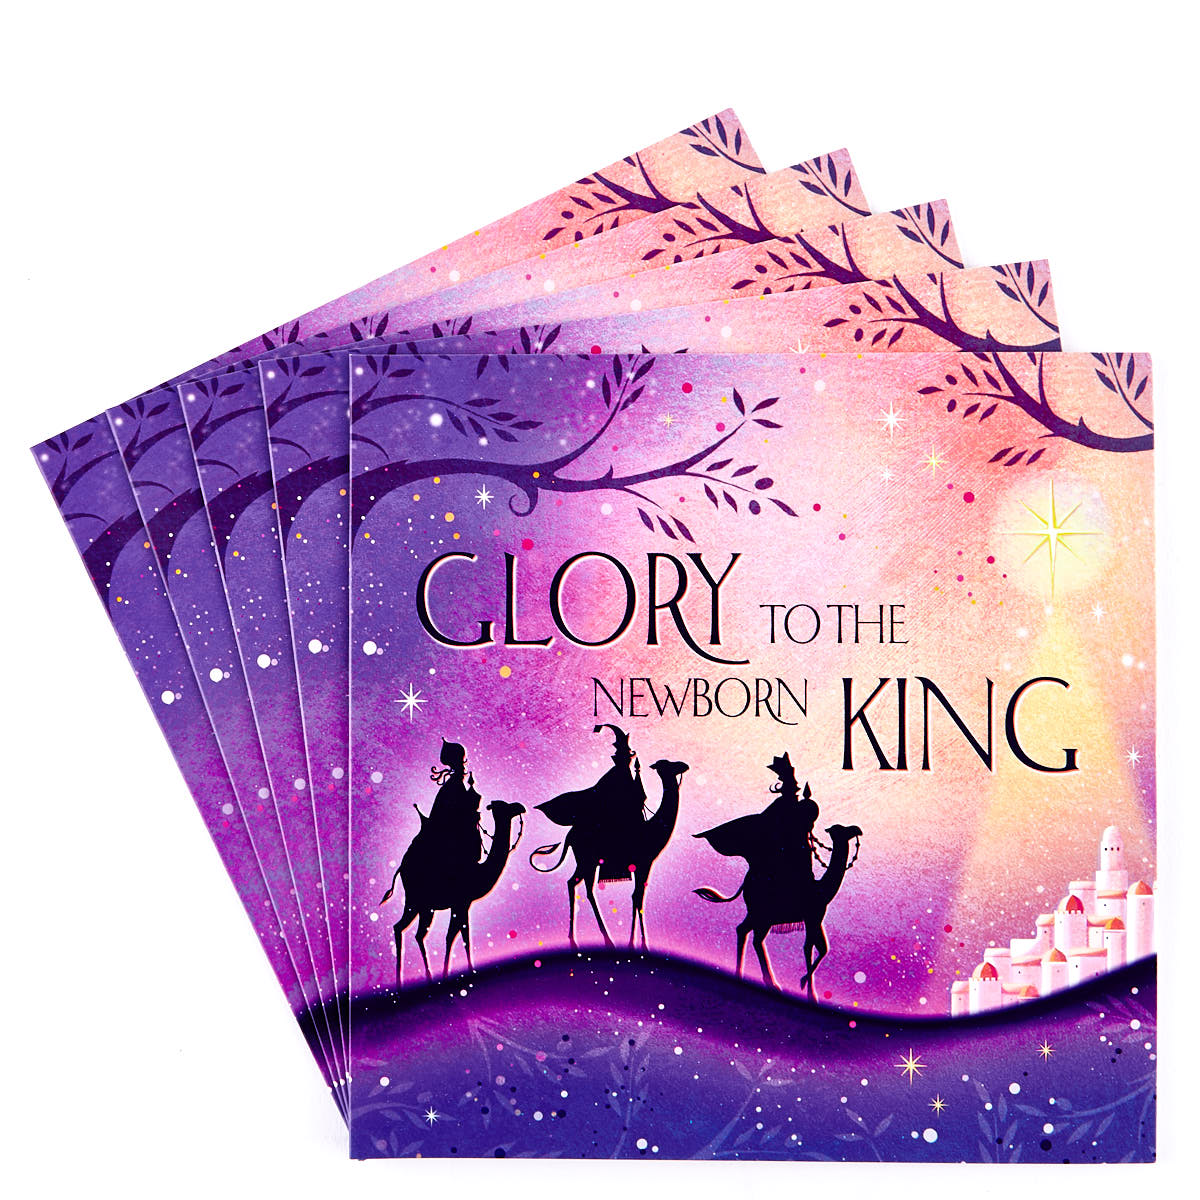 Charity Christmas Cards - 3 Wise Men Pack Of 10